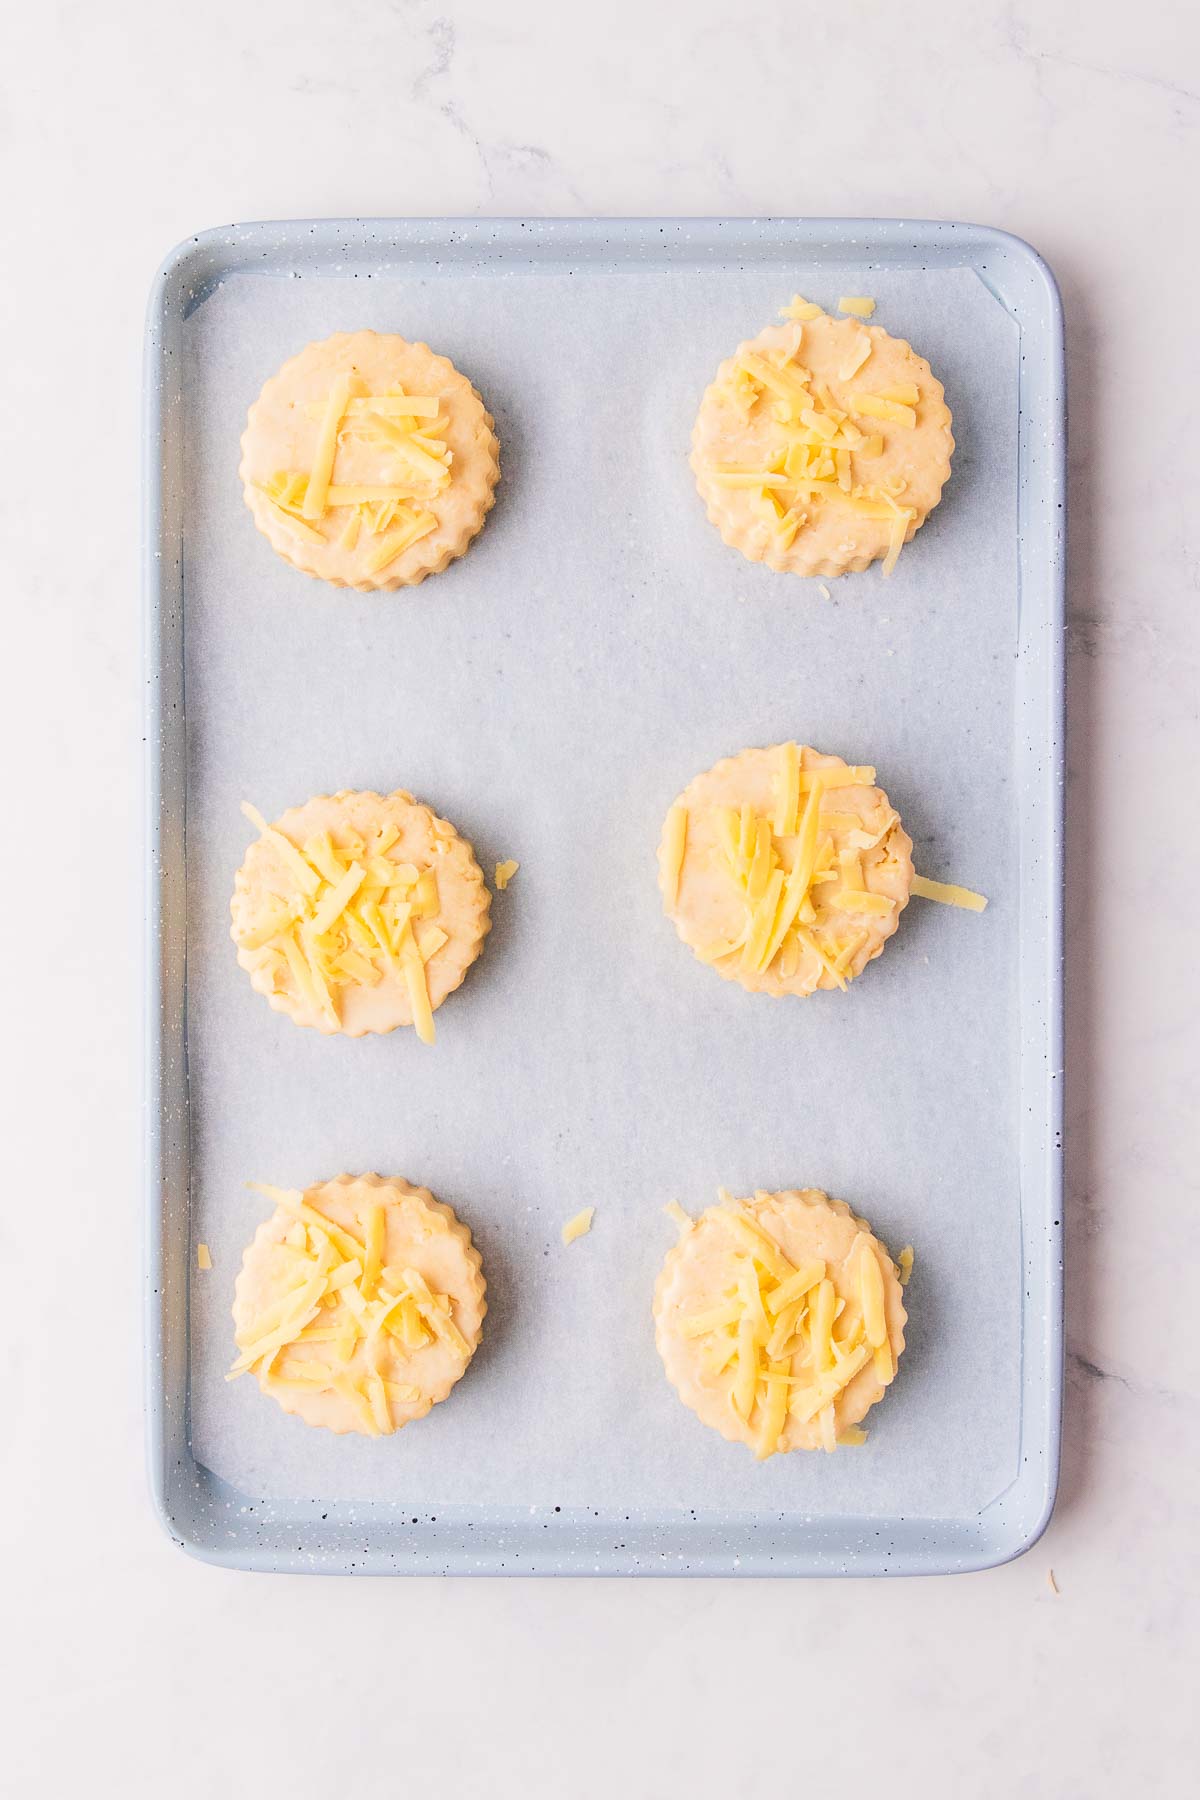 The scones cut out with a fluted round cutter, on a baking tray, the shapes have been bushed with egg wash and sprinkled with grated cheese.